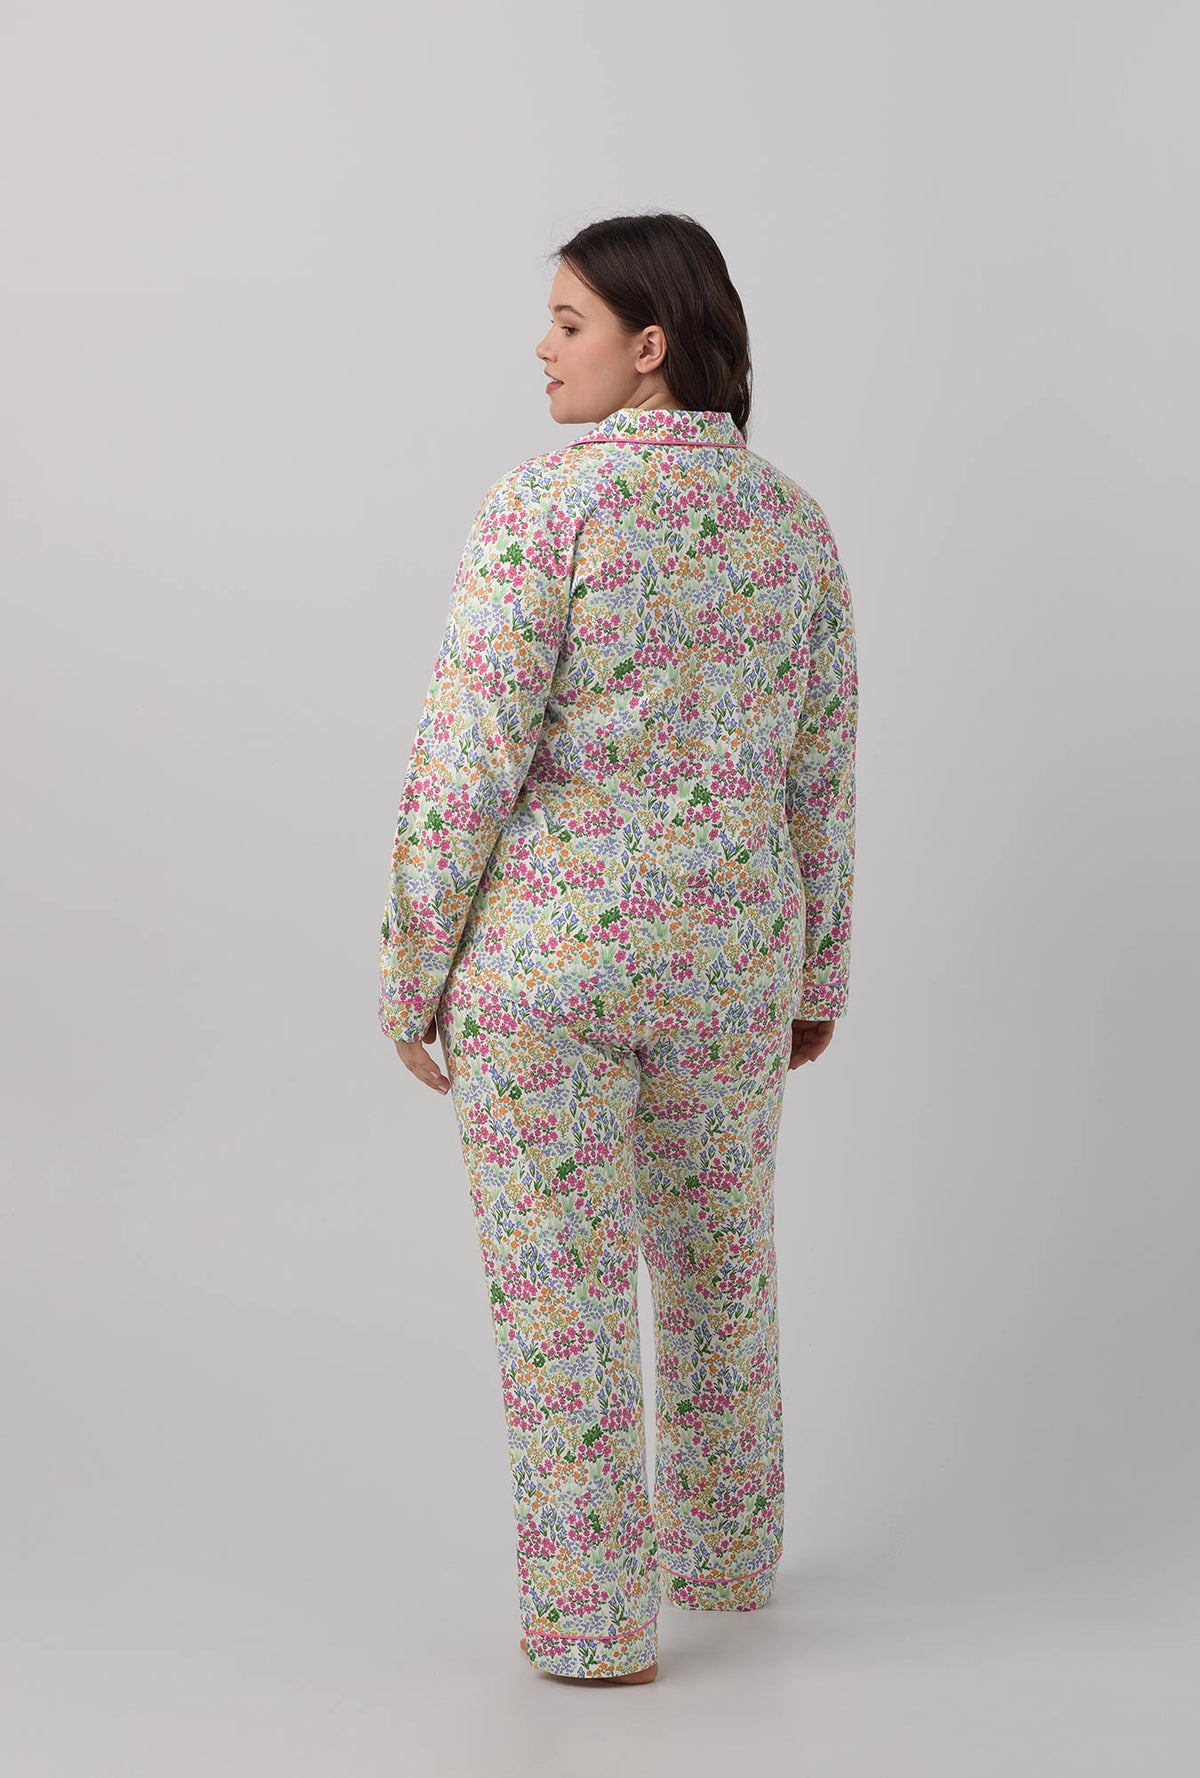 A lady wearing multi color long sleeve classic stretch jersey plus size pj set with cottage garden print.